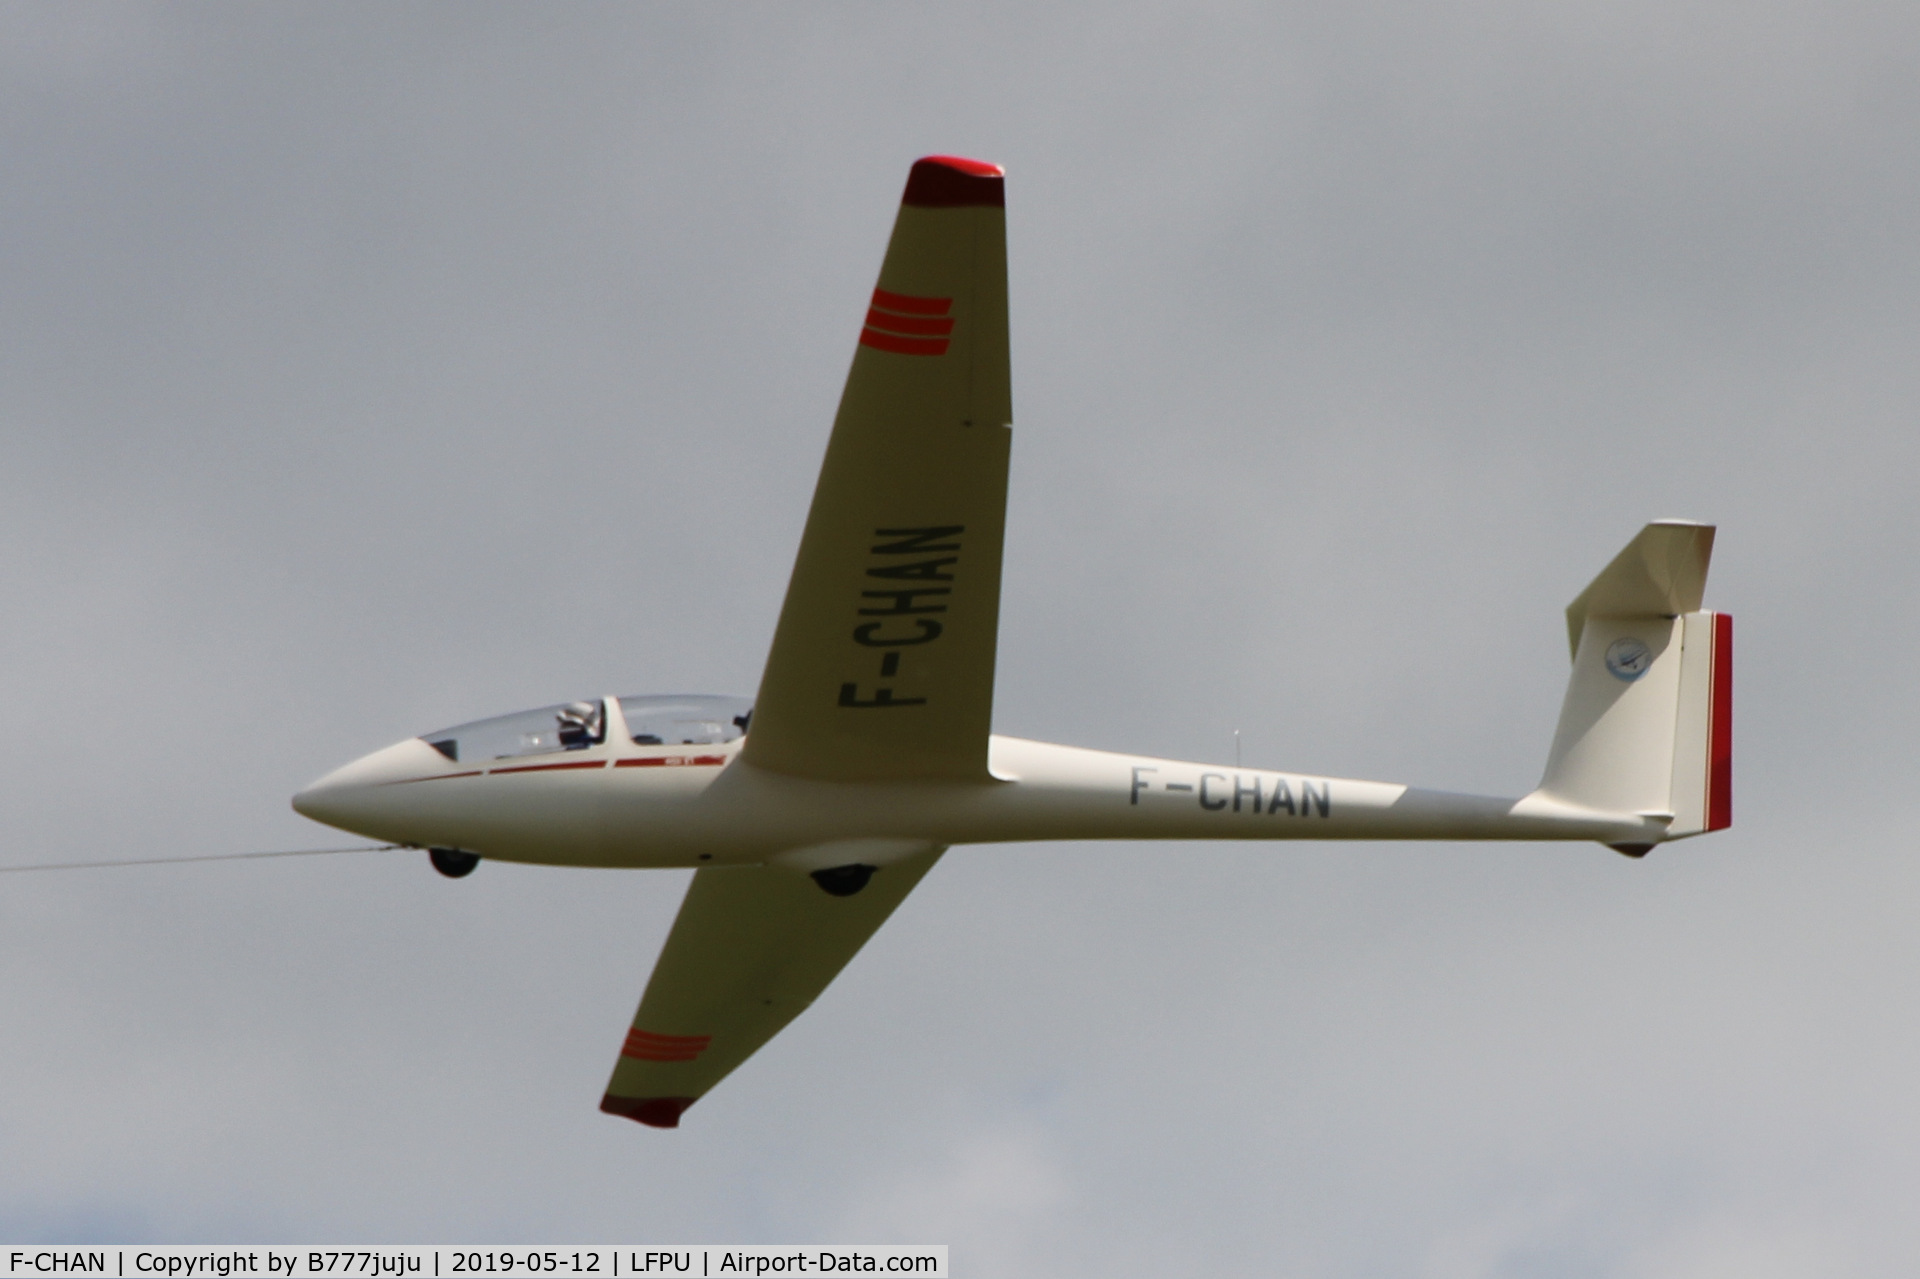 F-CHAN, Schleicher ASK-21 C/N 21505, at Moret